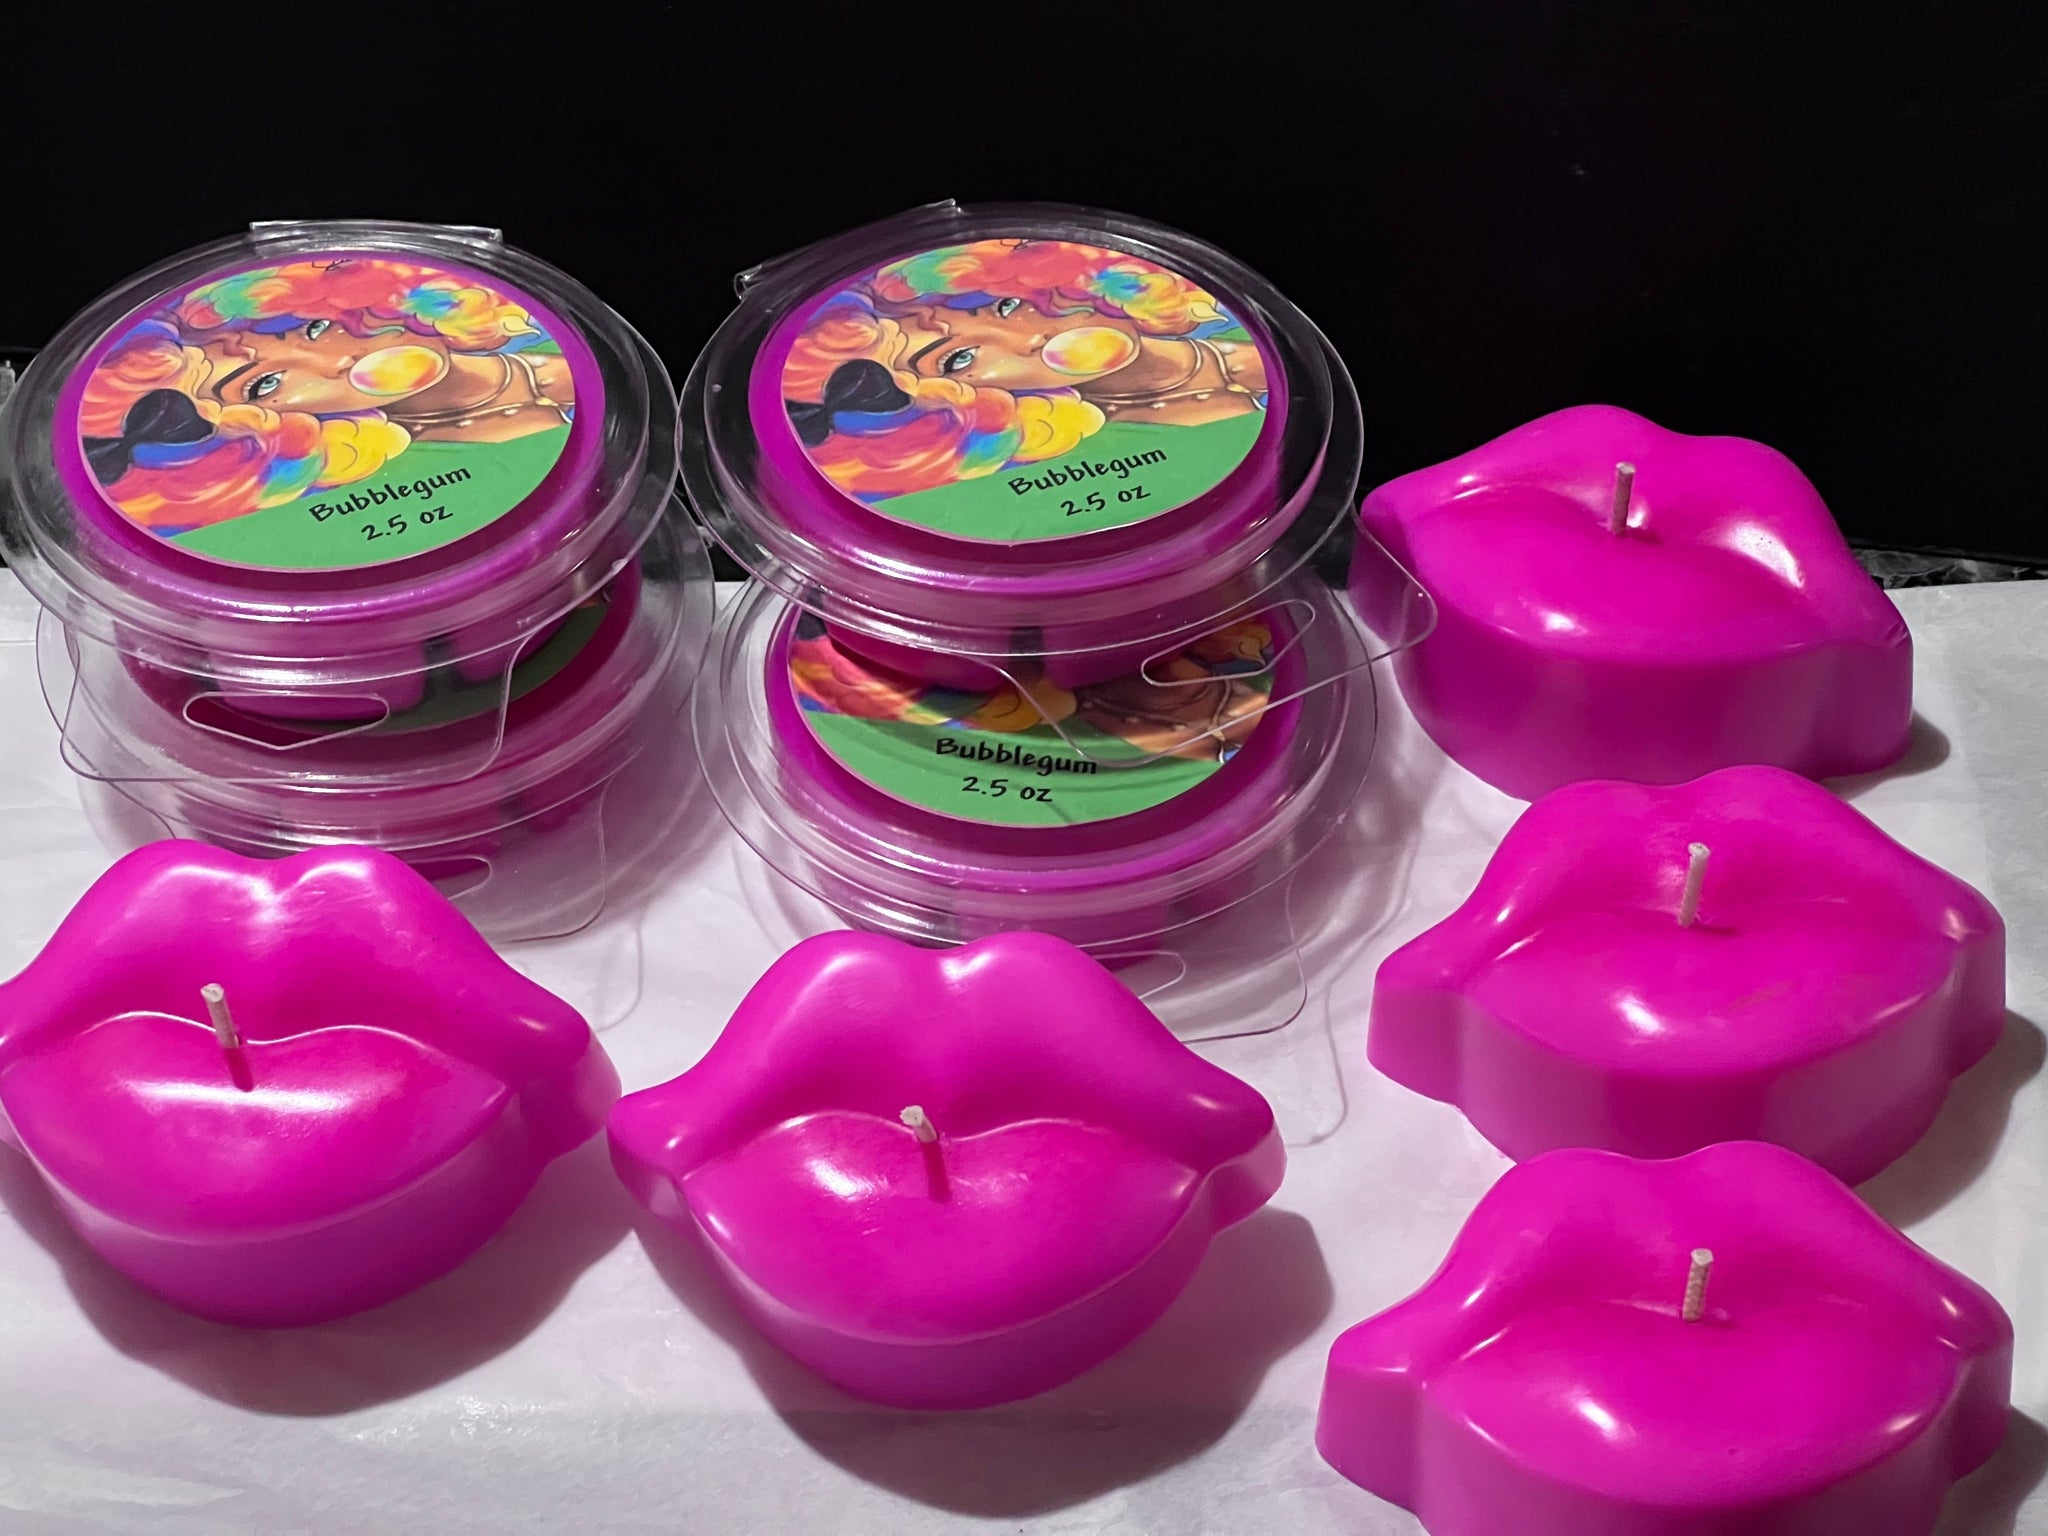 Mini lip candles or wax melts (Set of 3) - Scandal Candles Co.